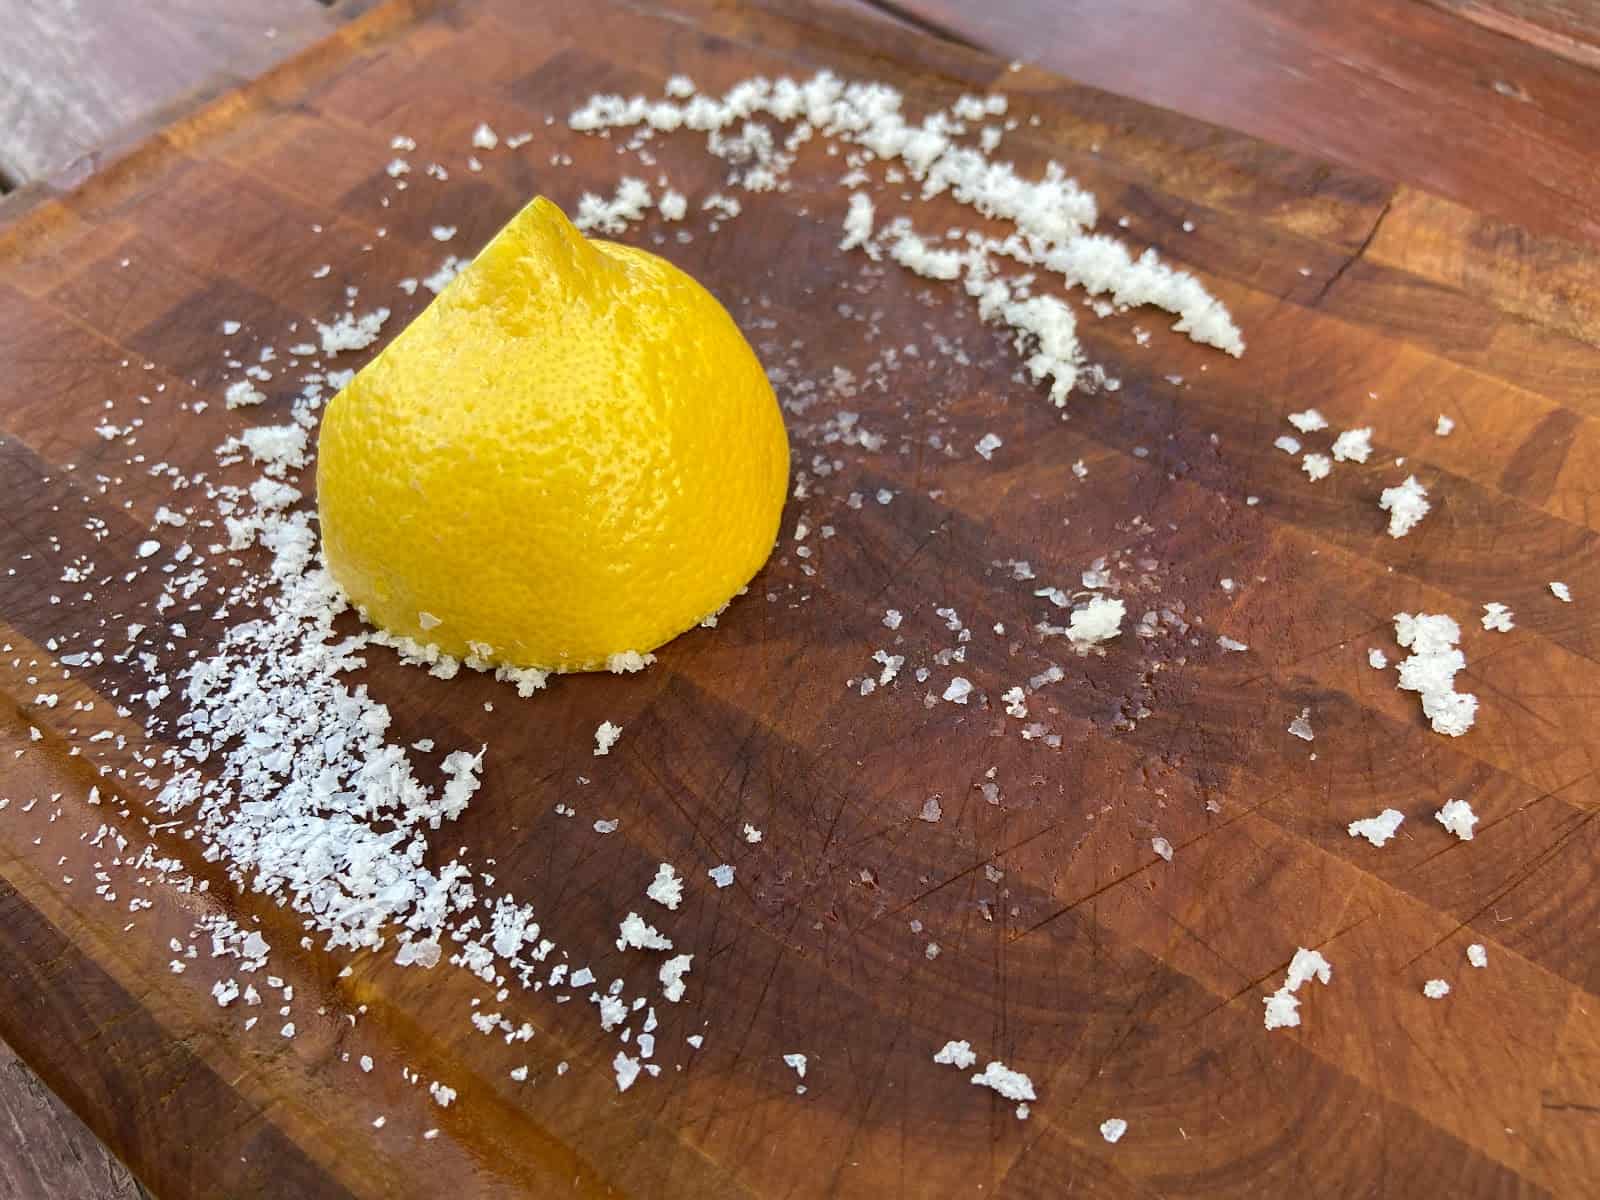 Cutting board with sliced lemon and salt on top.